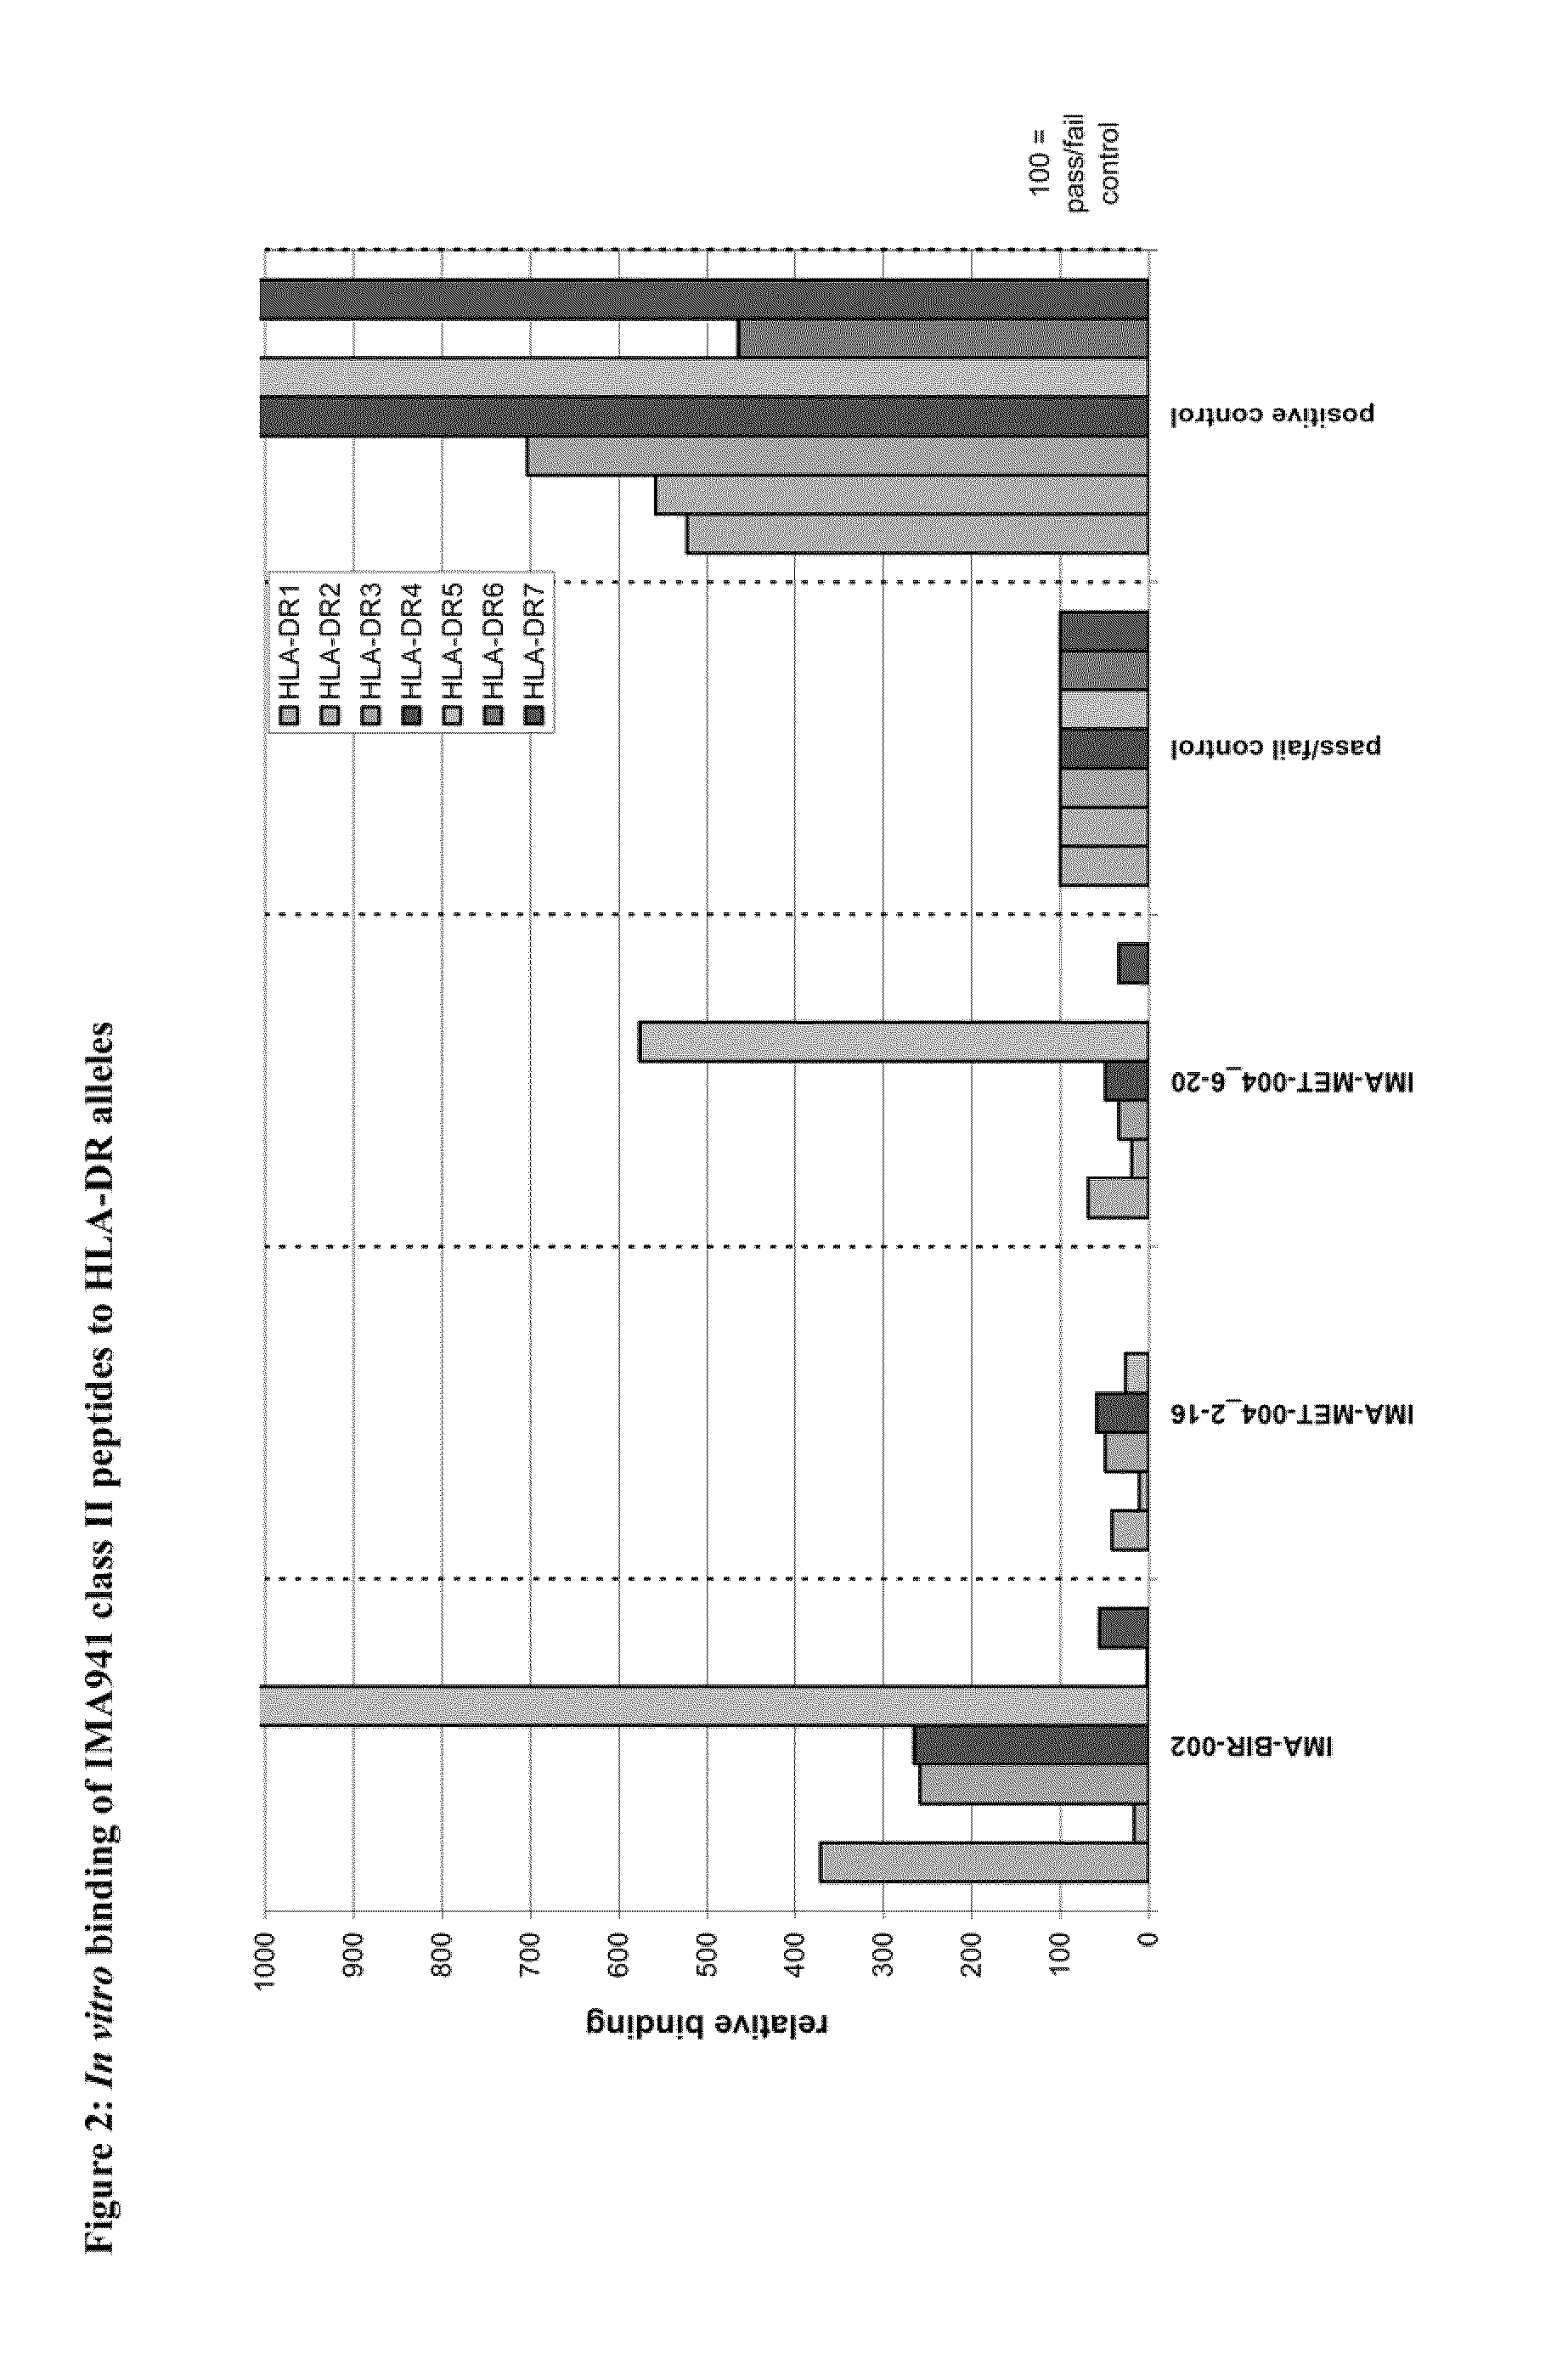 Composition of tumor-associated peptides and related anti-cancer vaccine for the treatment of gastric cancer and other cancers